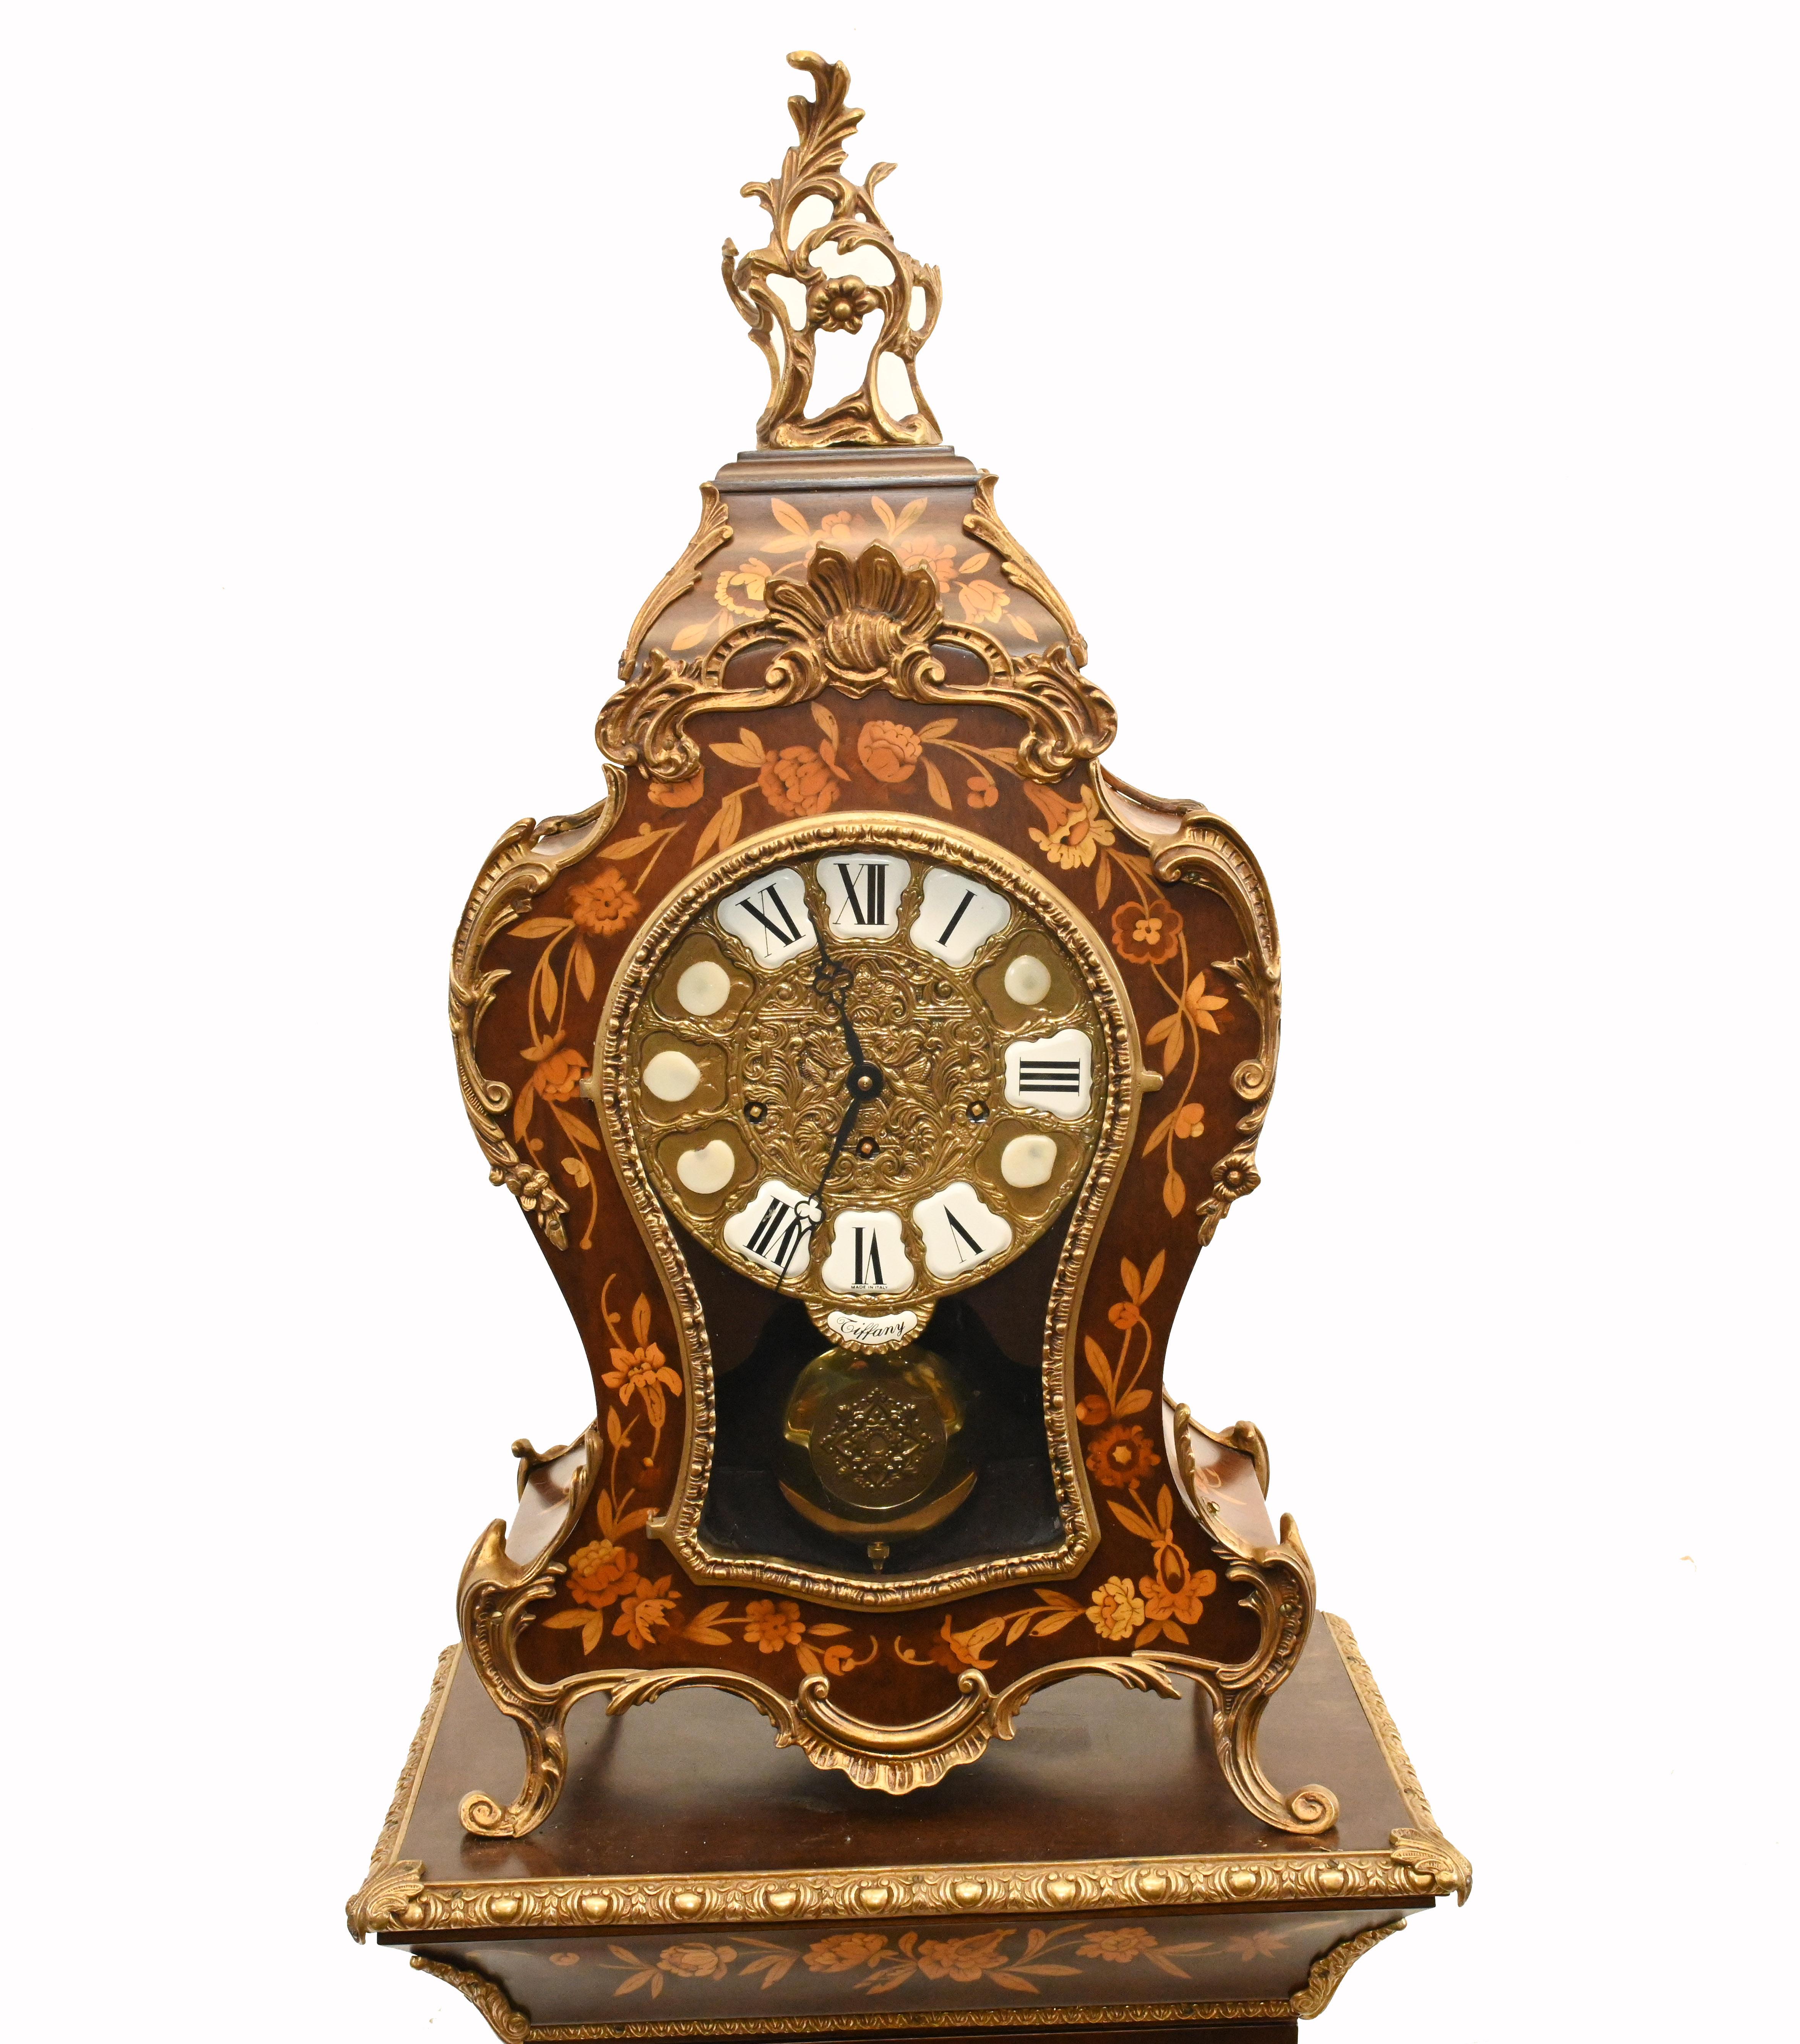 Eye catching Italian Tiffany clock on a pedestal stand
Stand is actually a glass fronted cabinet that opens out
Piece is circa 1920 and the clock chimes
Intricate floral marquetry inlay on all surfaces
Bought from a dealer on Marche Biron at Paris